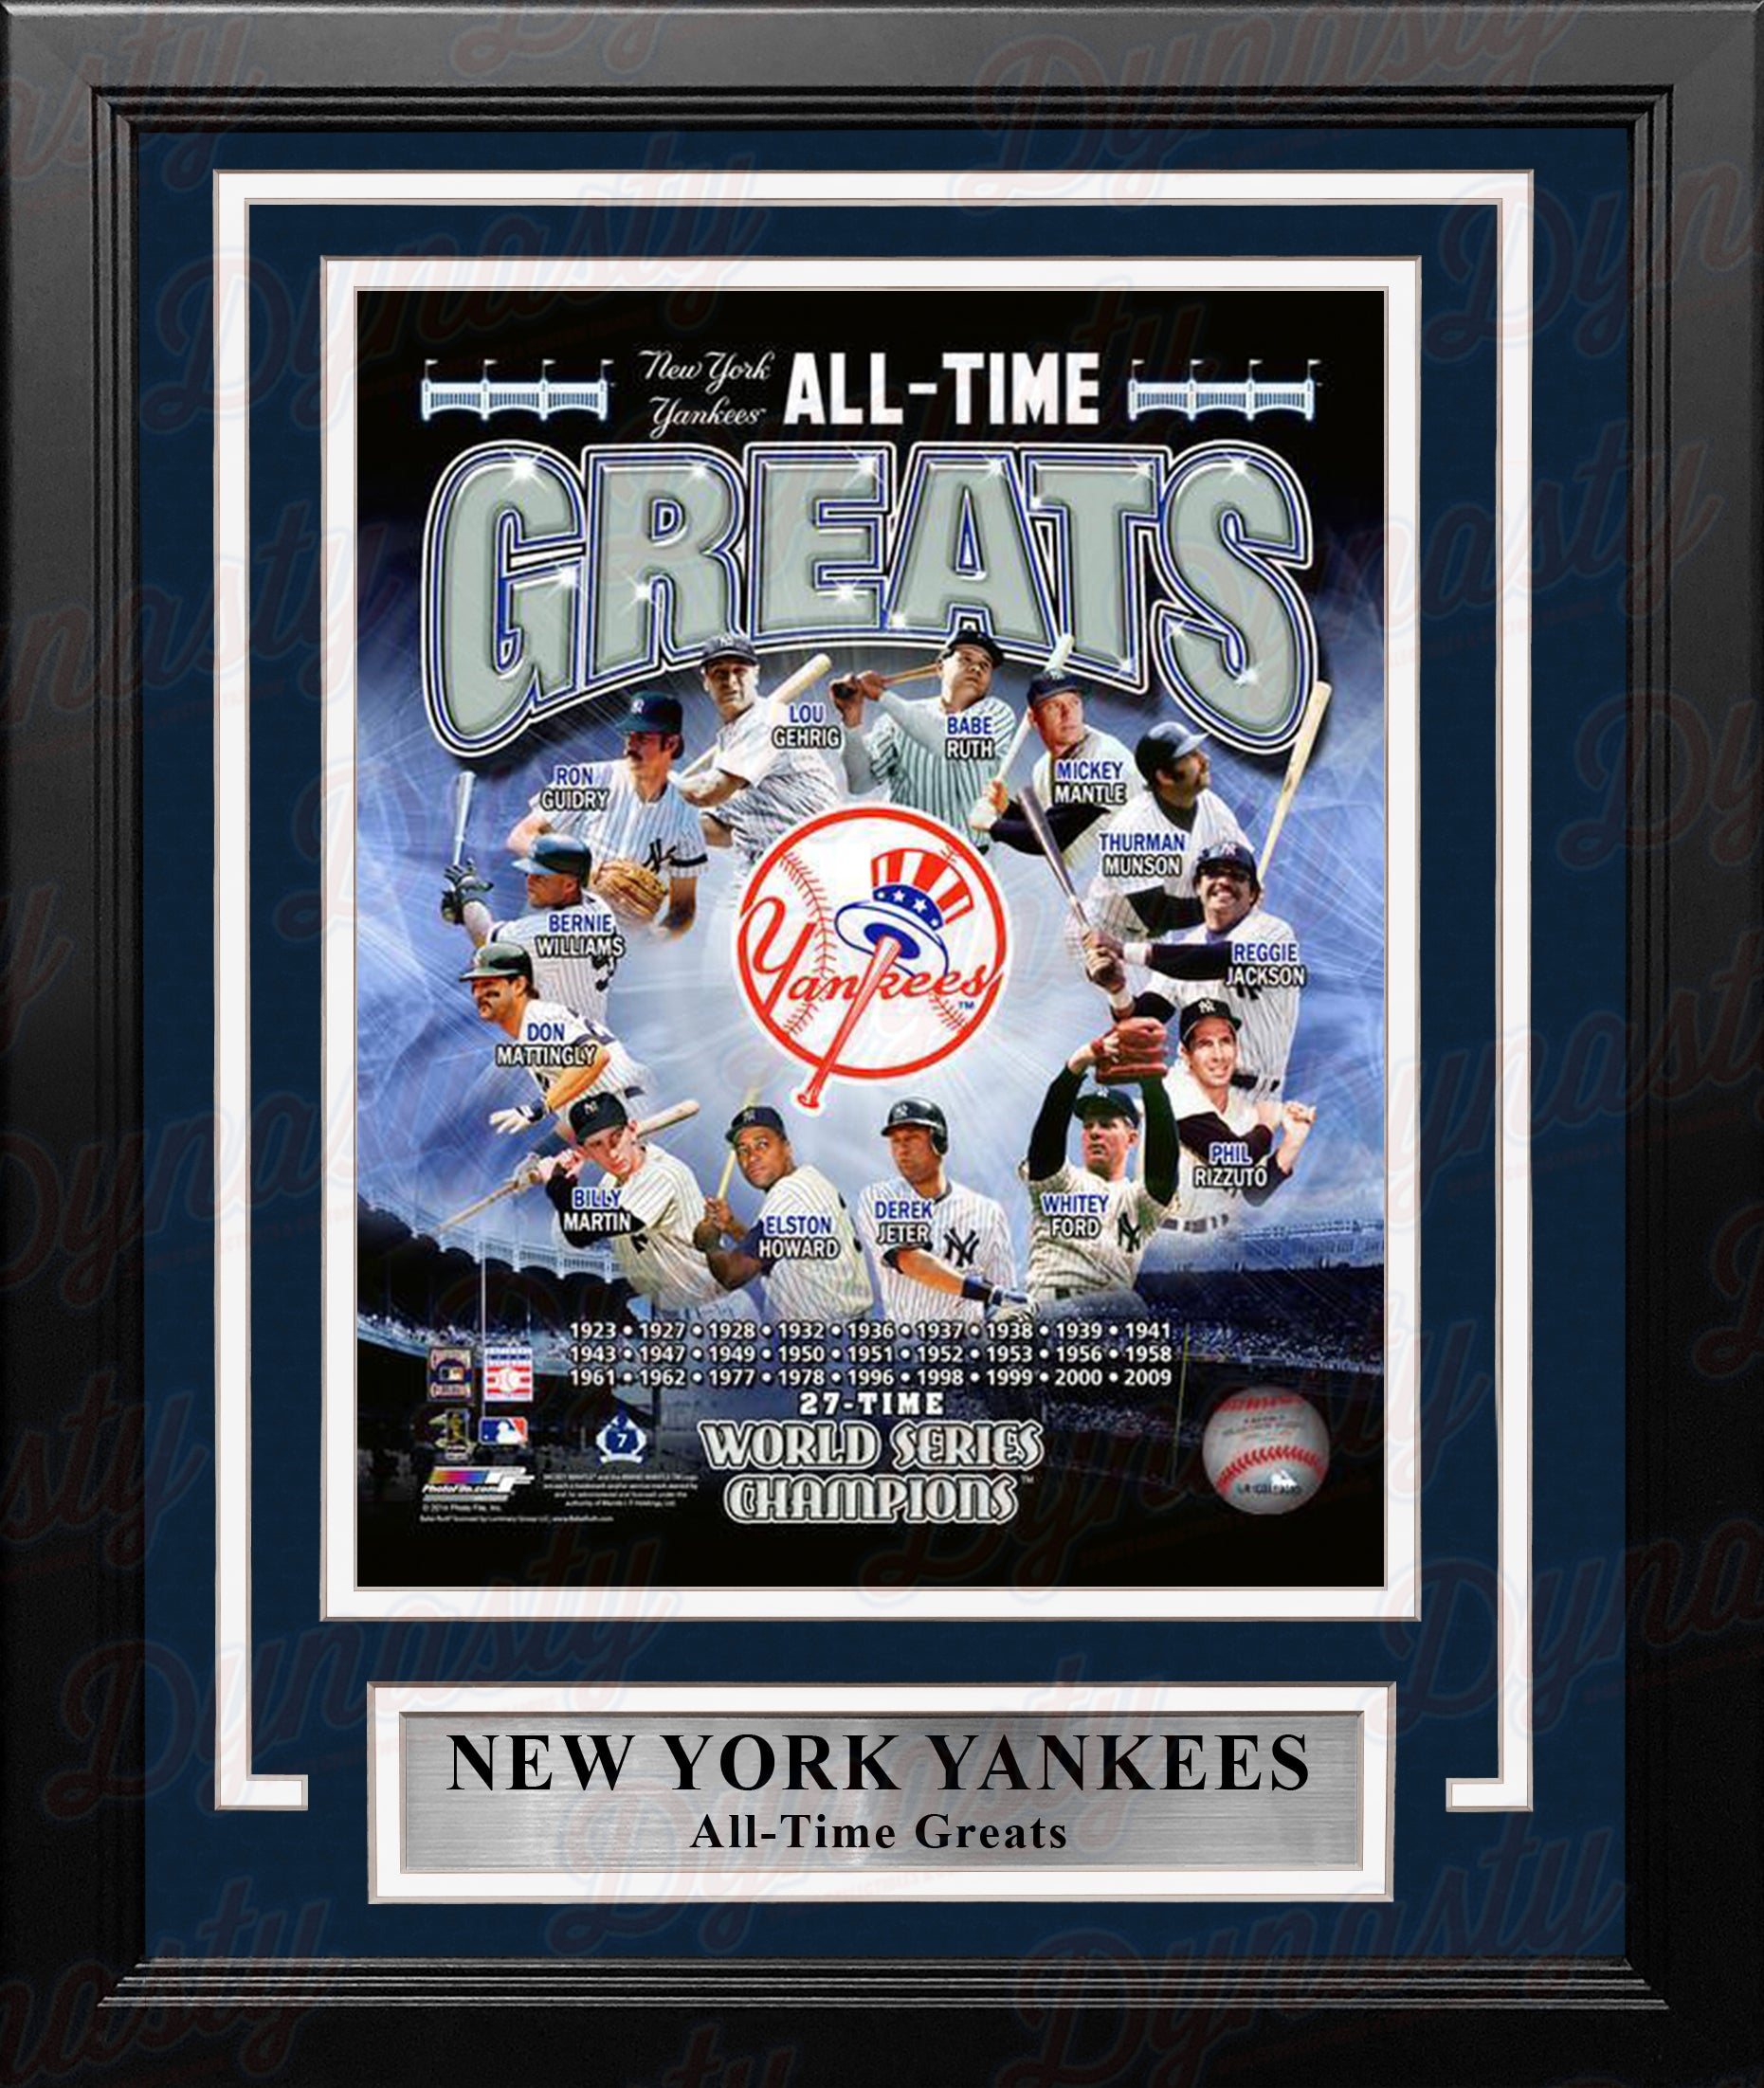 New York Yankees All-Time Greats Collage MLB Baseball 8" x 10" Framed and Matted Photo - Dynasty Sports & Framing 